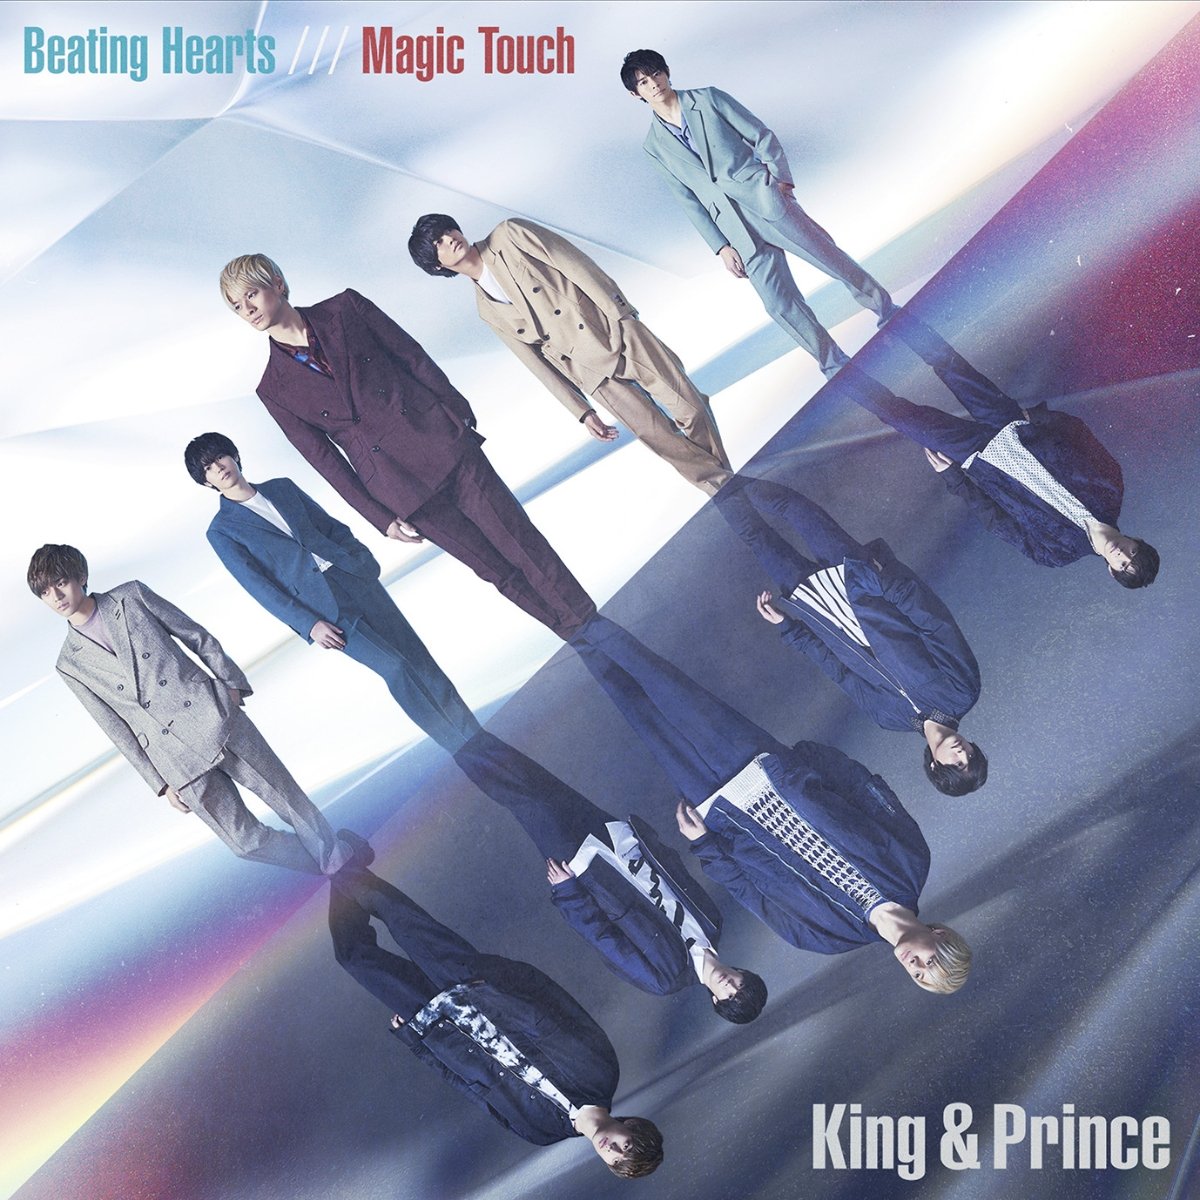 CD Shop - KING & PRINCE BEATING HEARTS/MAGIC TOUCH